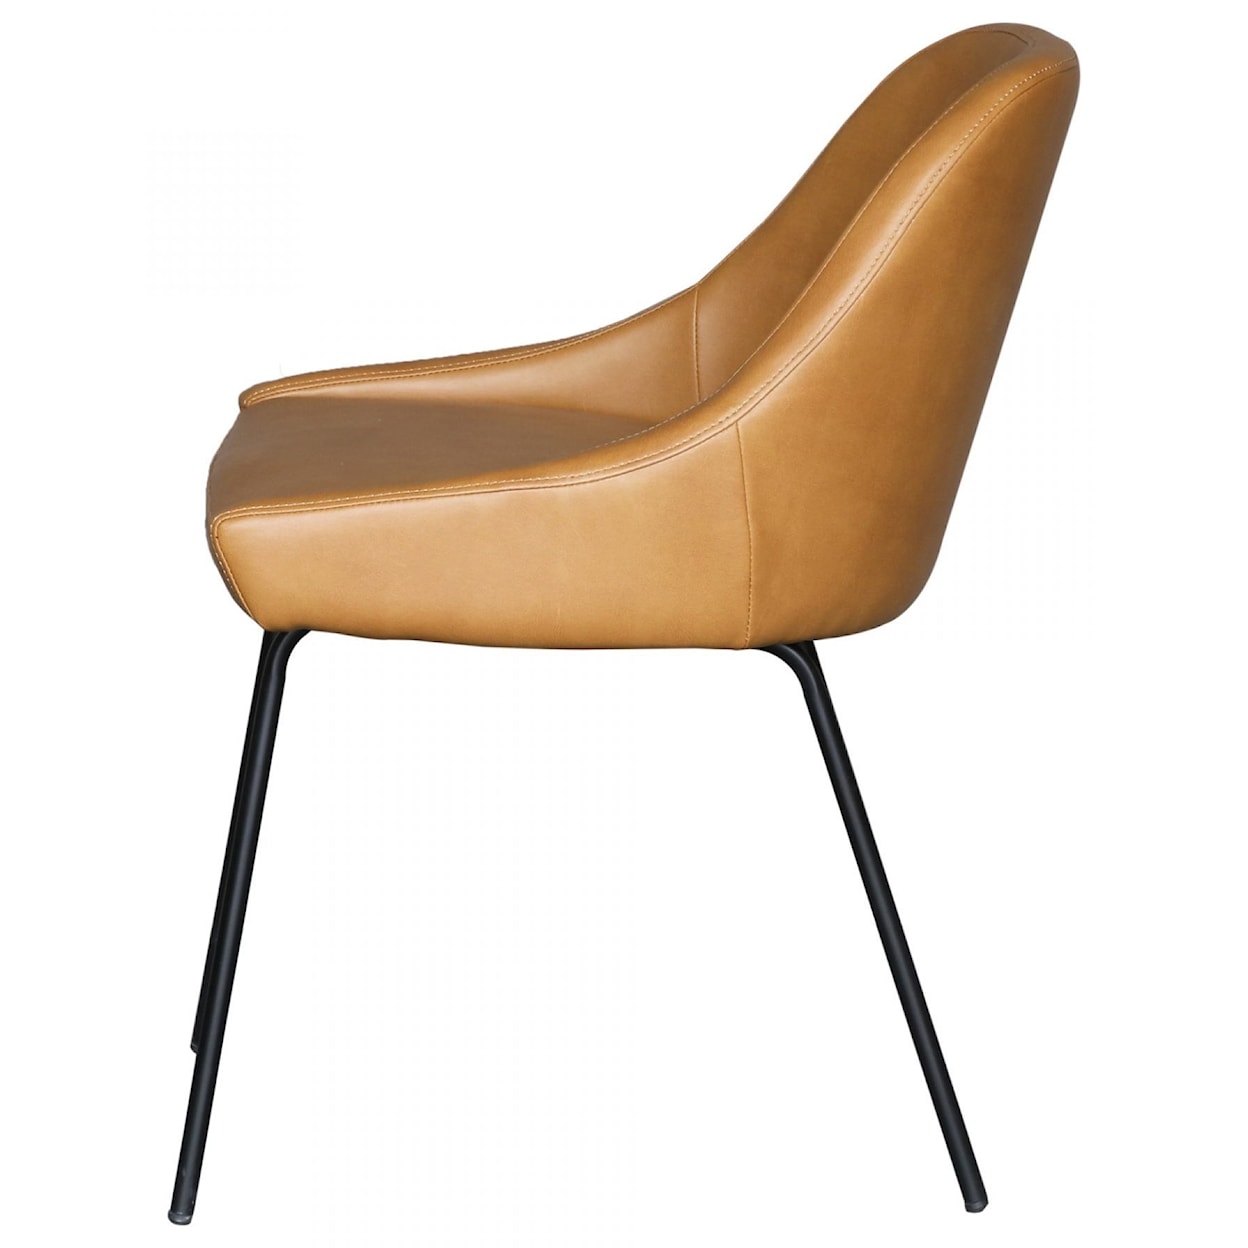 Moe's Home Collection Blaze Dining Chair